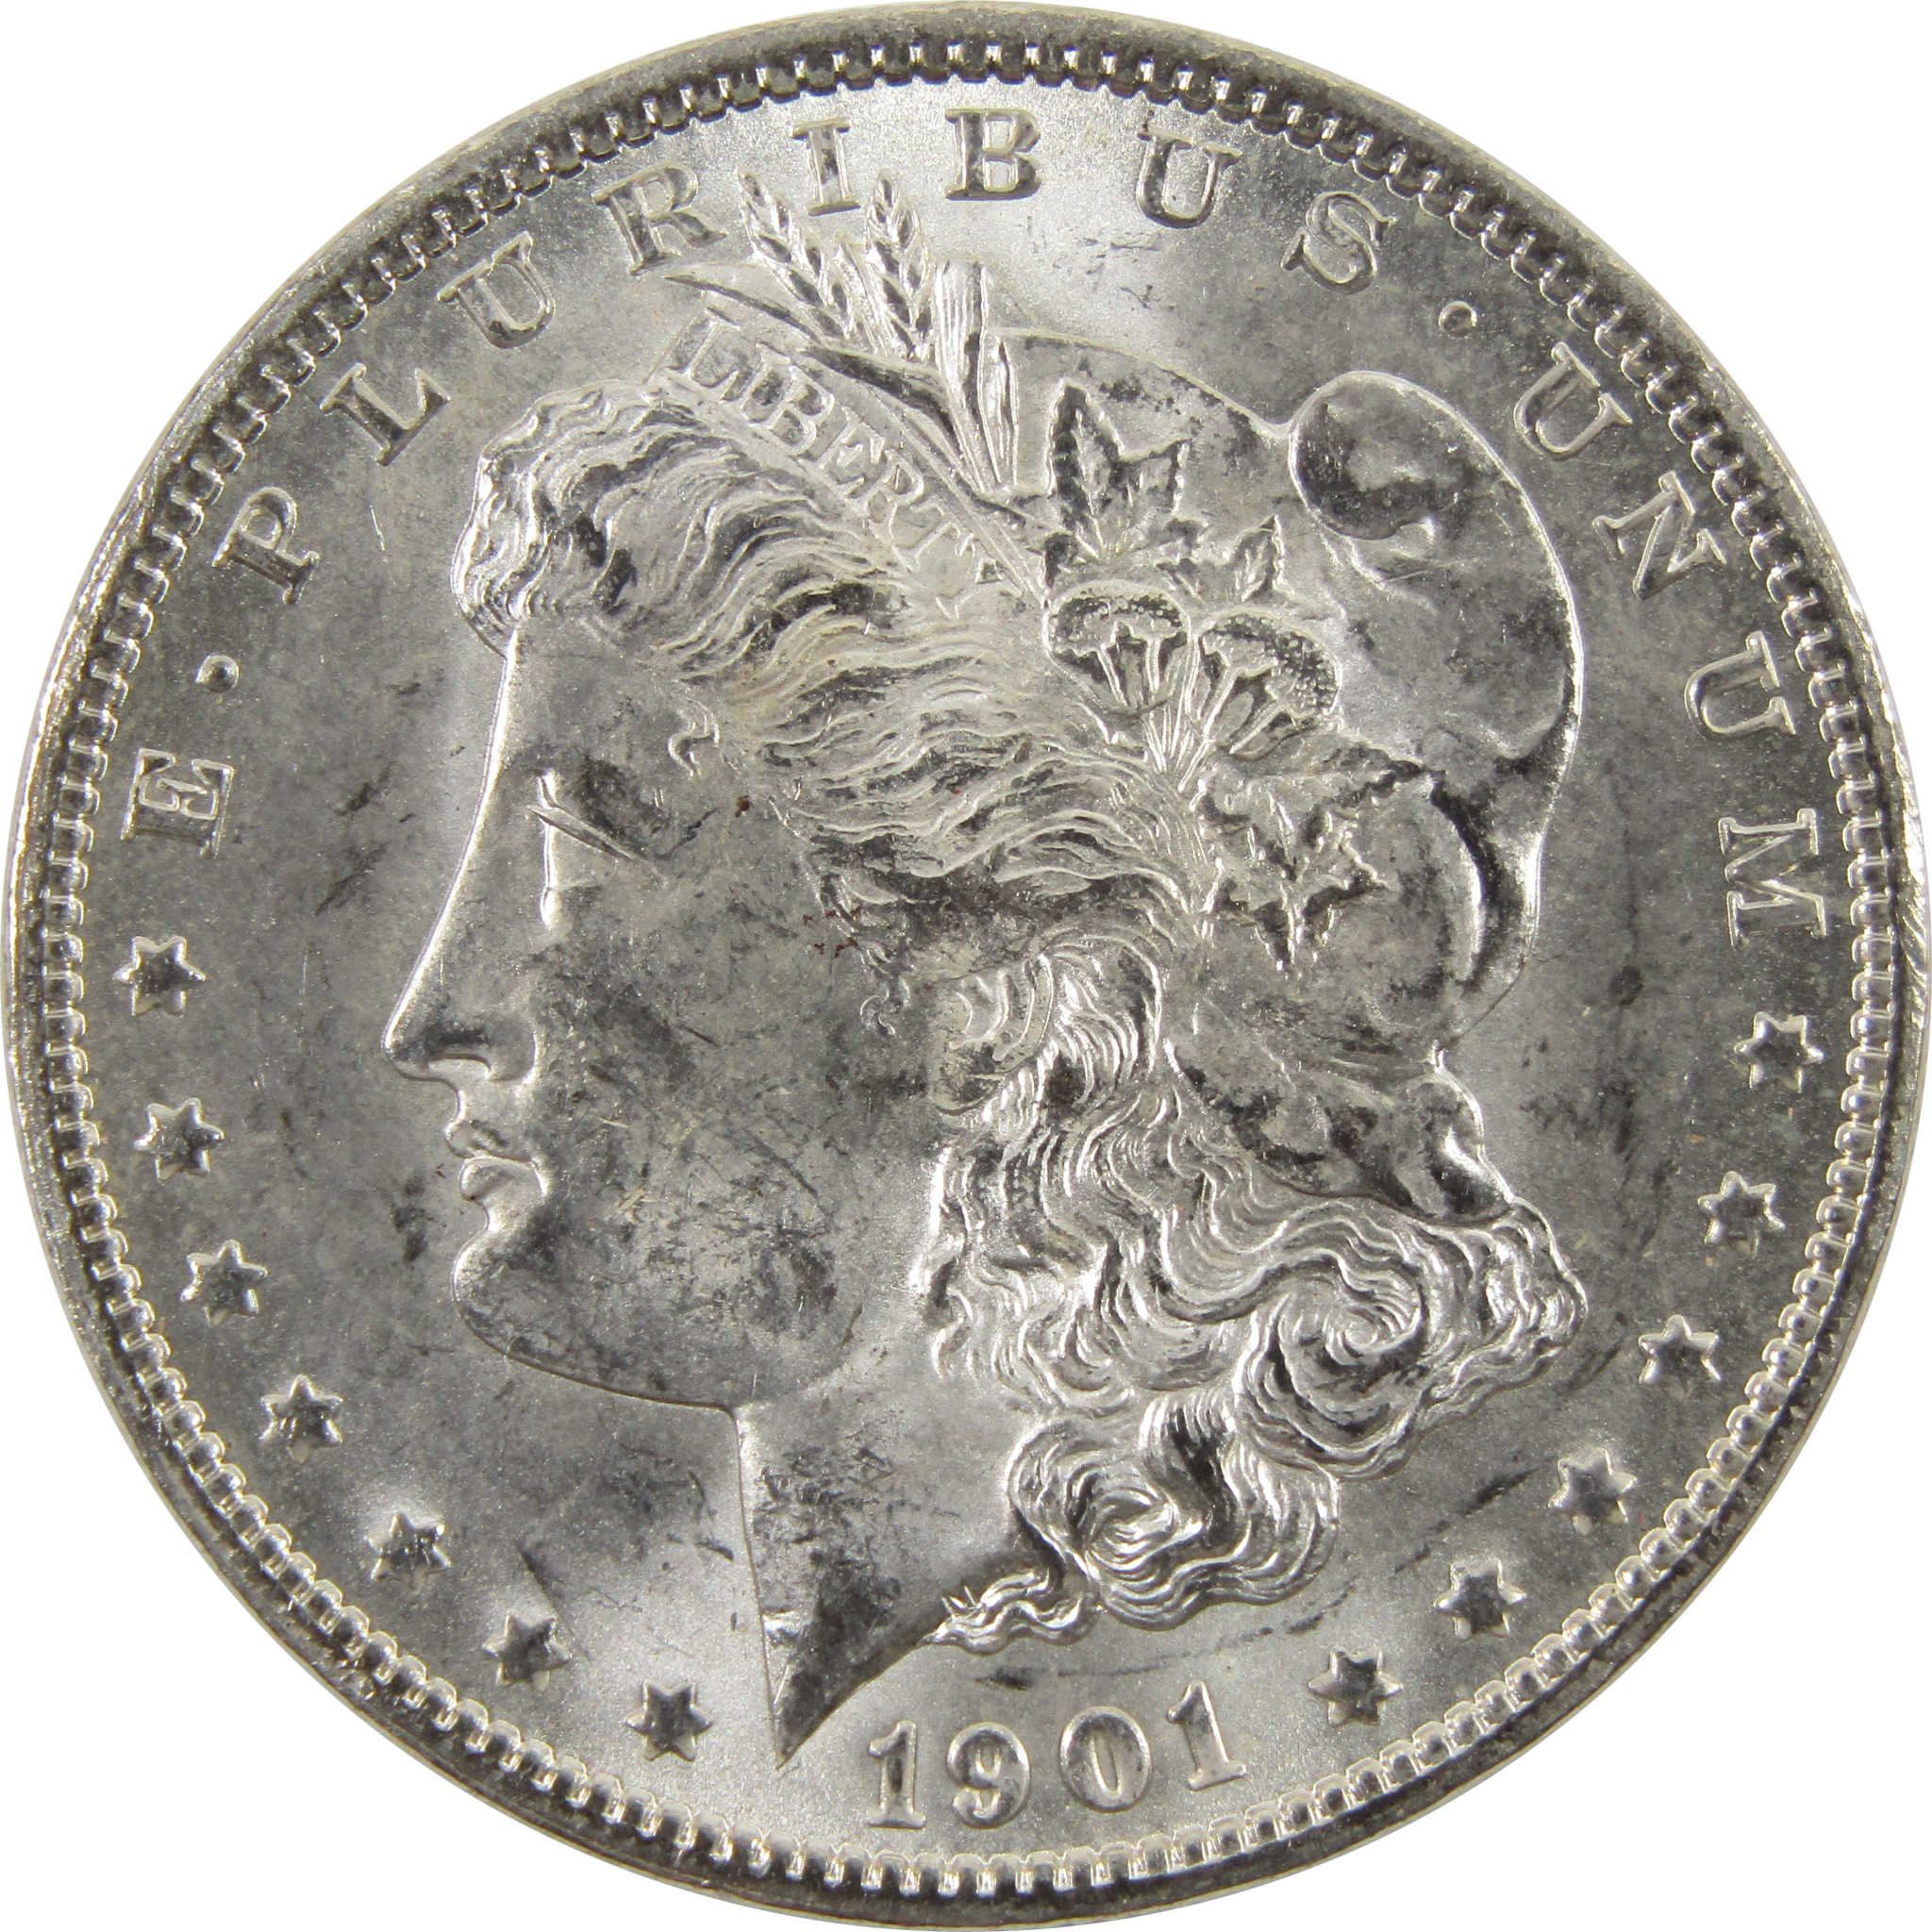 1901 O Morgan Dollar Uncirculated Details 90% Silver $1 SKU:I10469 - Morgan coin - Morgan silver dollar - Morgan silver dollar for sale - Profile Coins &amp; Collectibles